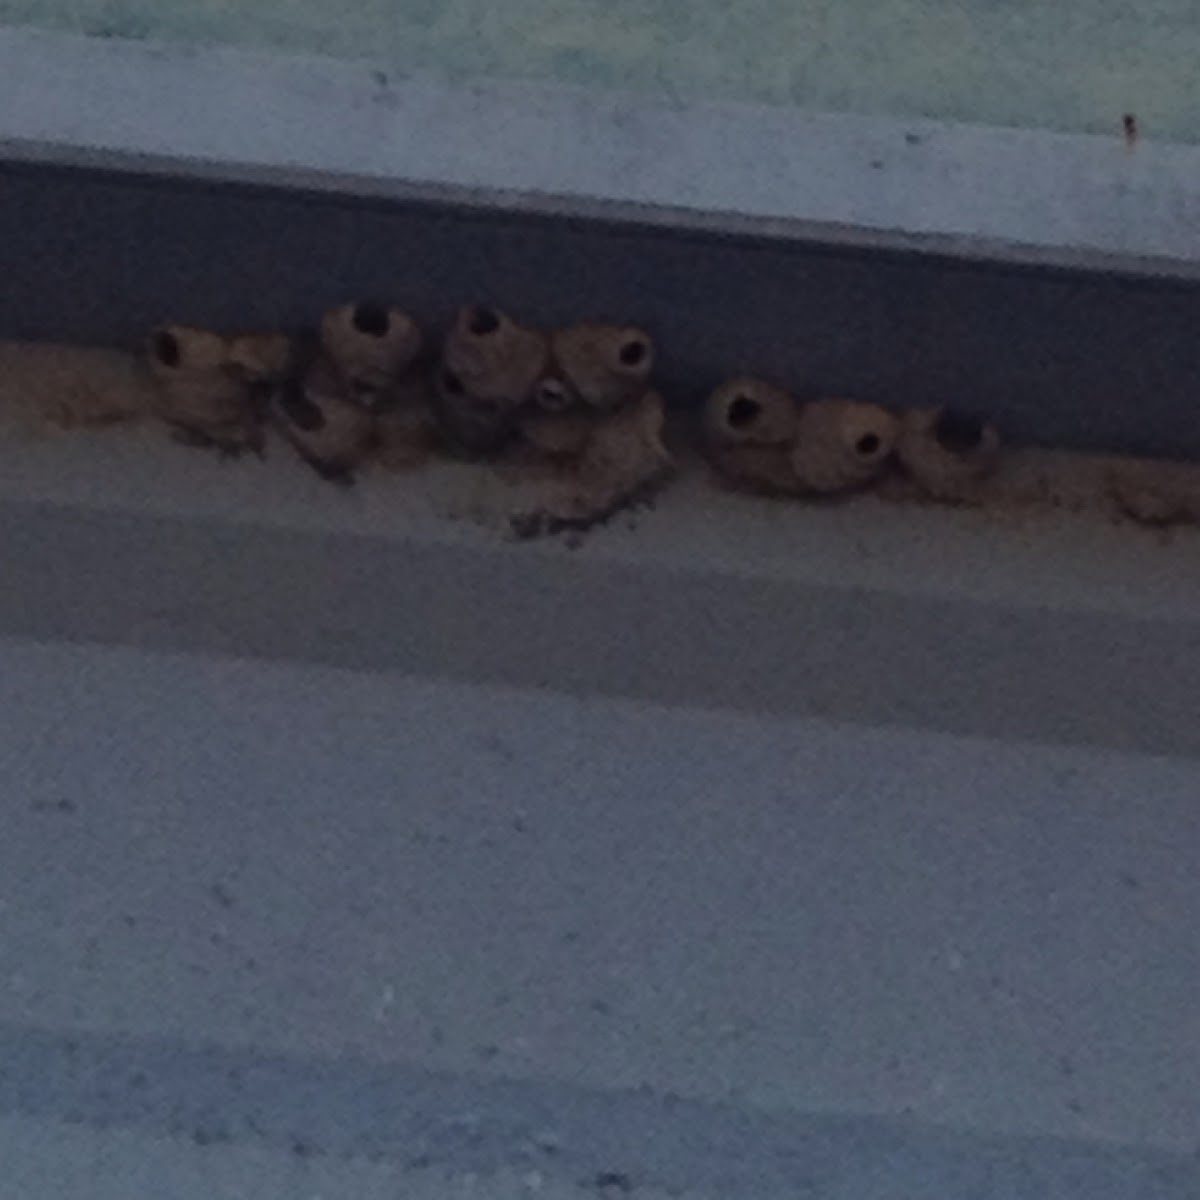 Swallow nests